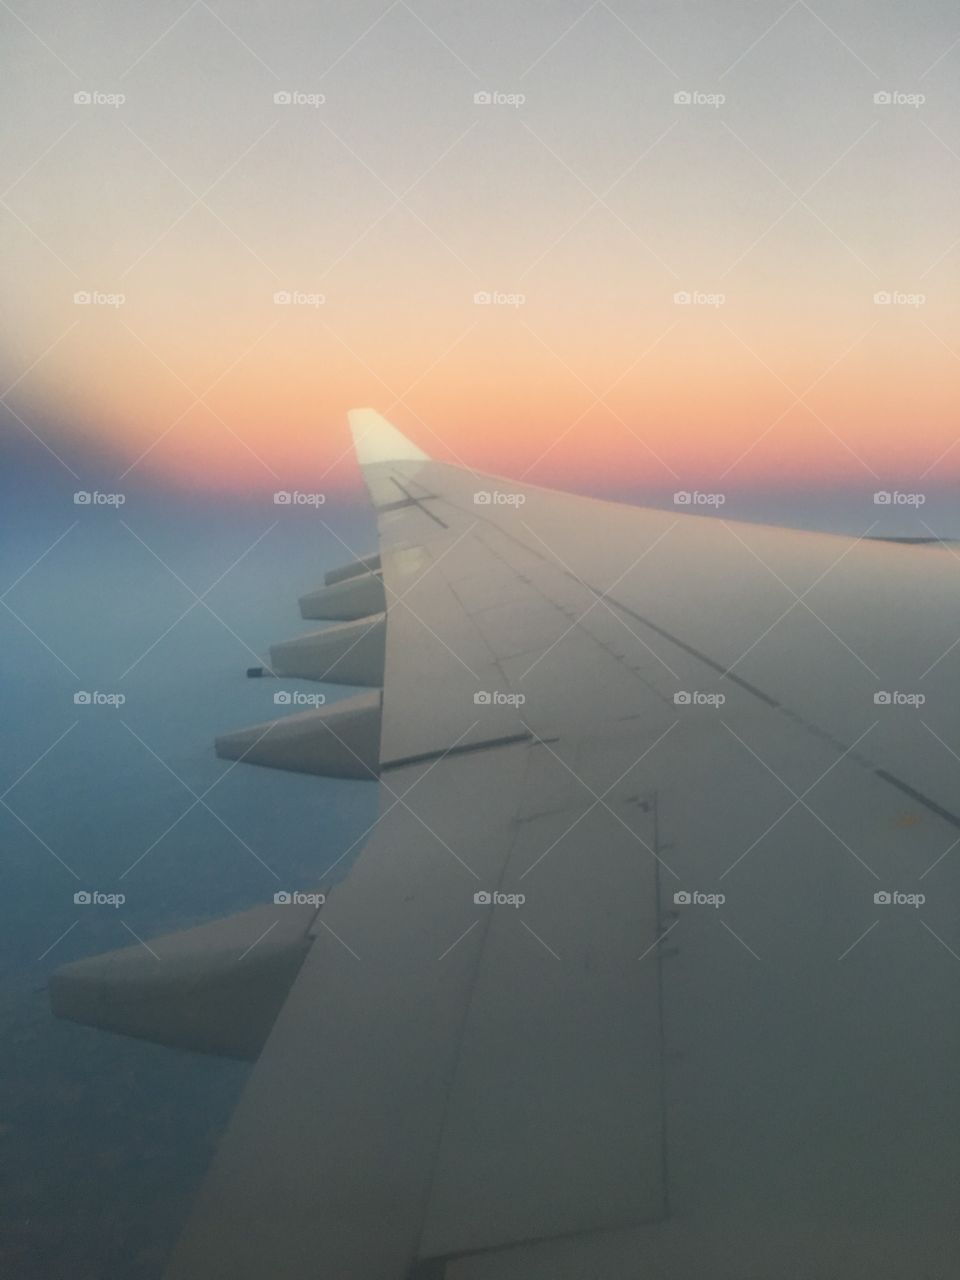 Sunset from an airplane window